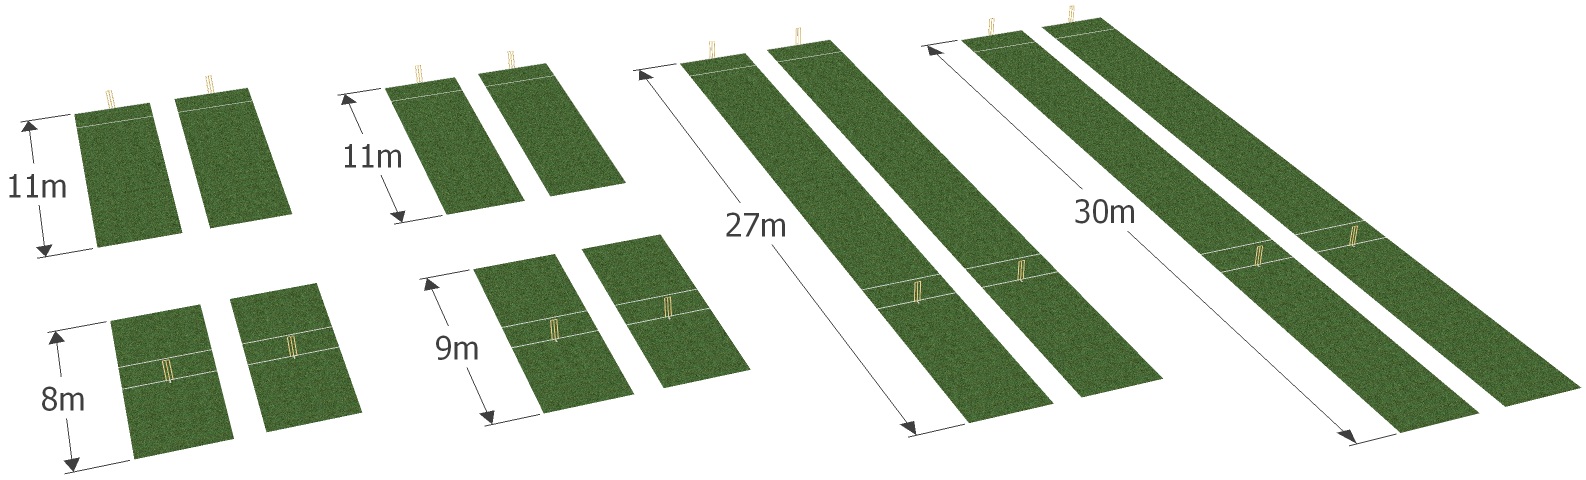 Pitch Configurations